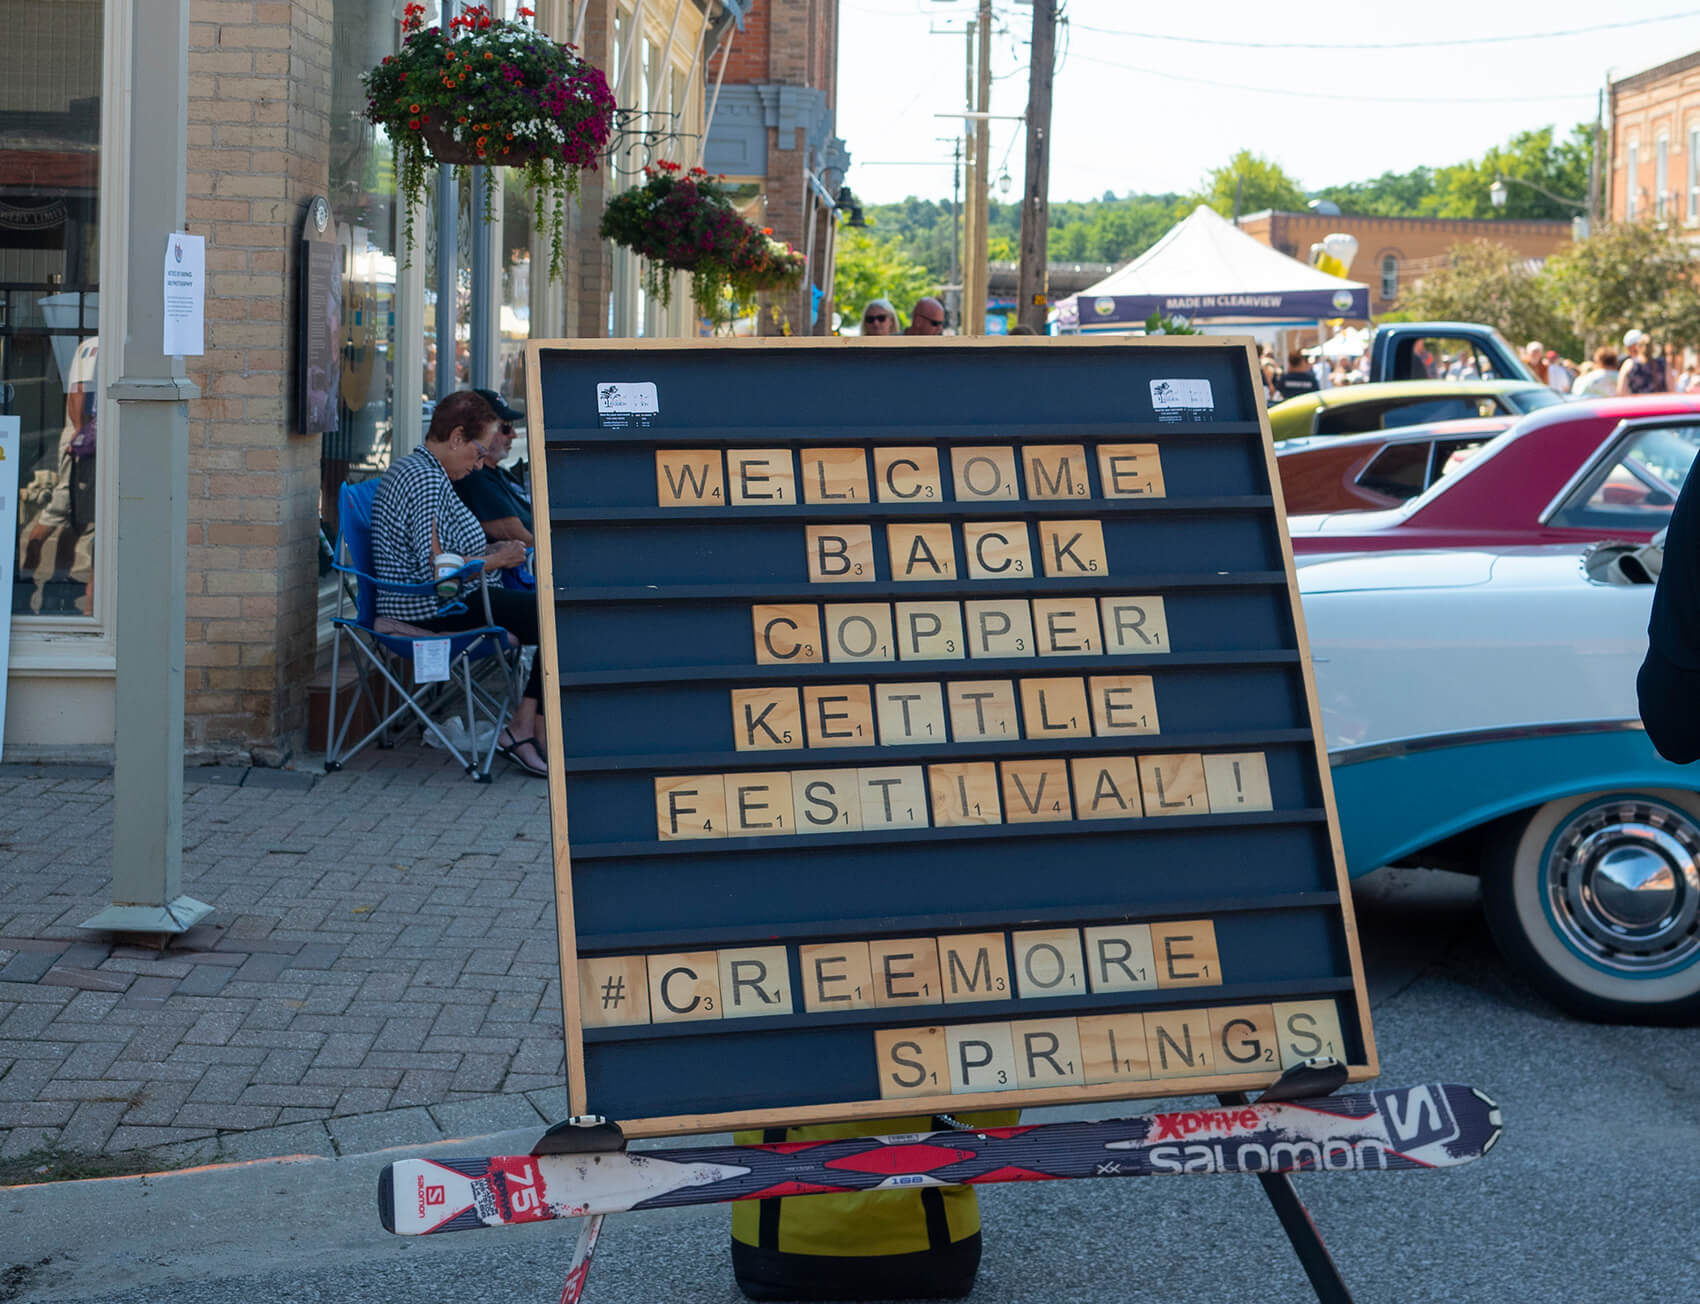 pieces scrabble sign forming the word "welcome copper kettle festival #Creemore springs